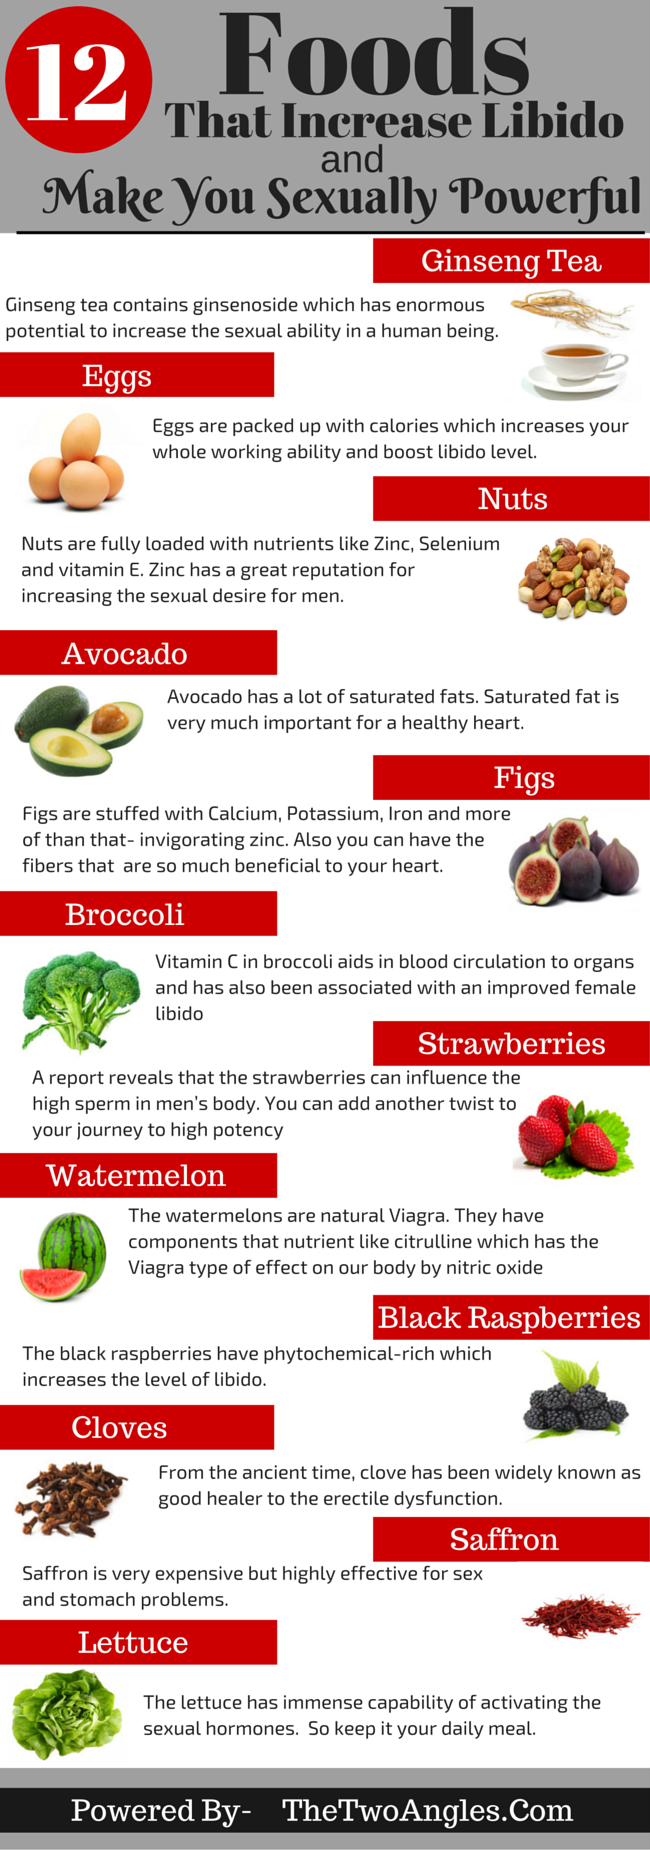 Foods-That-Increase-Libido-Infographic